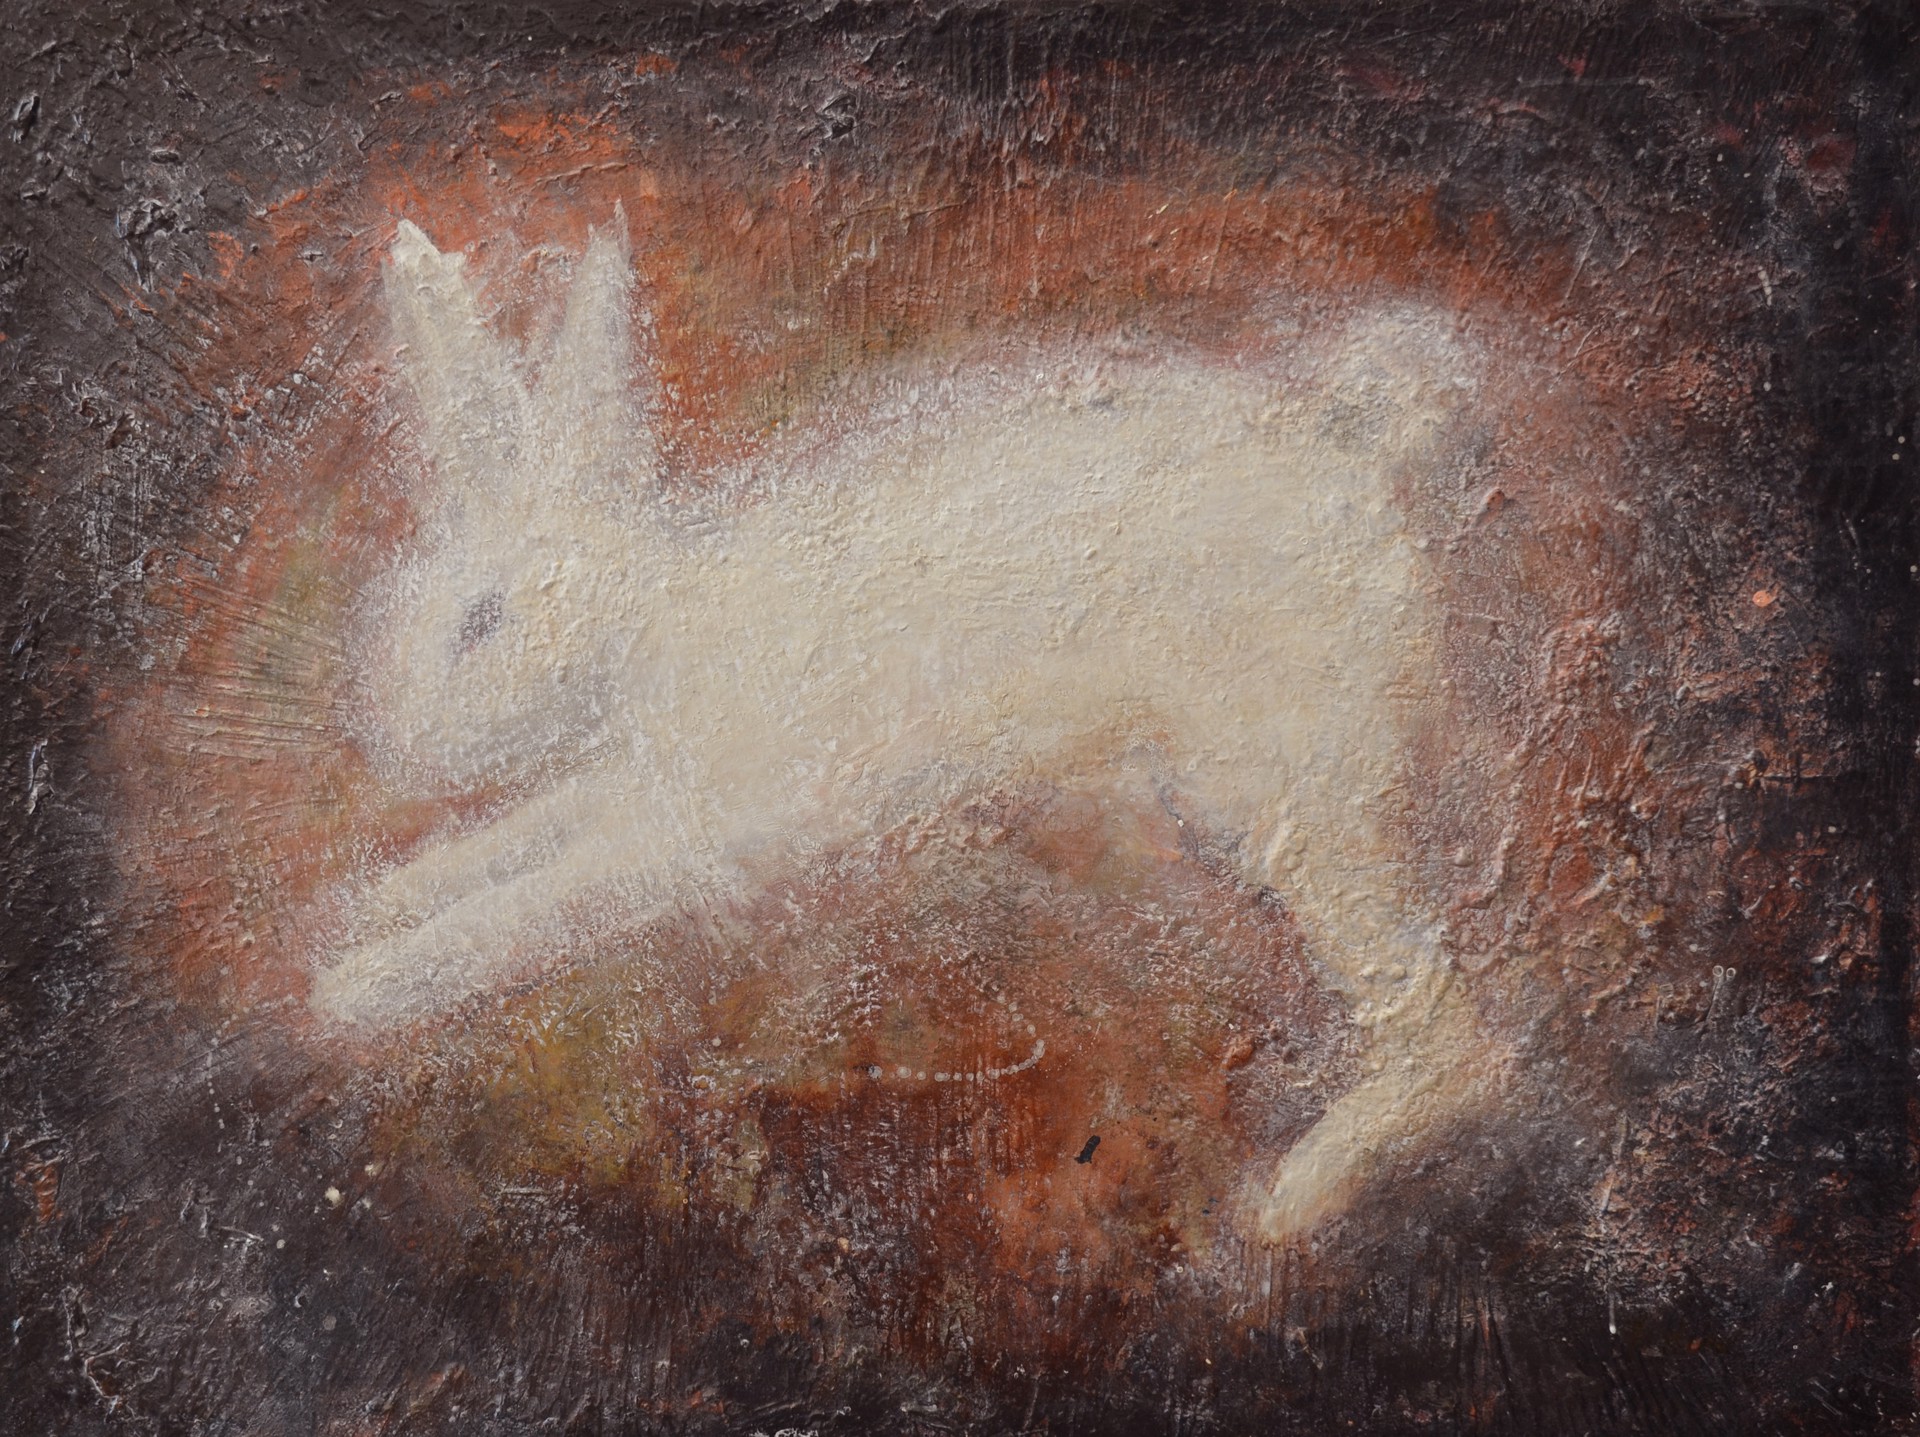 Rabbit (Sold) by Gail Foster